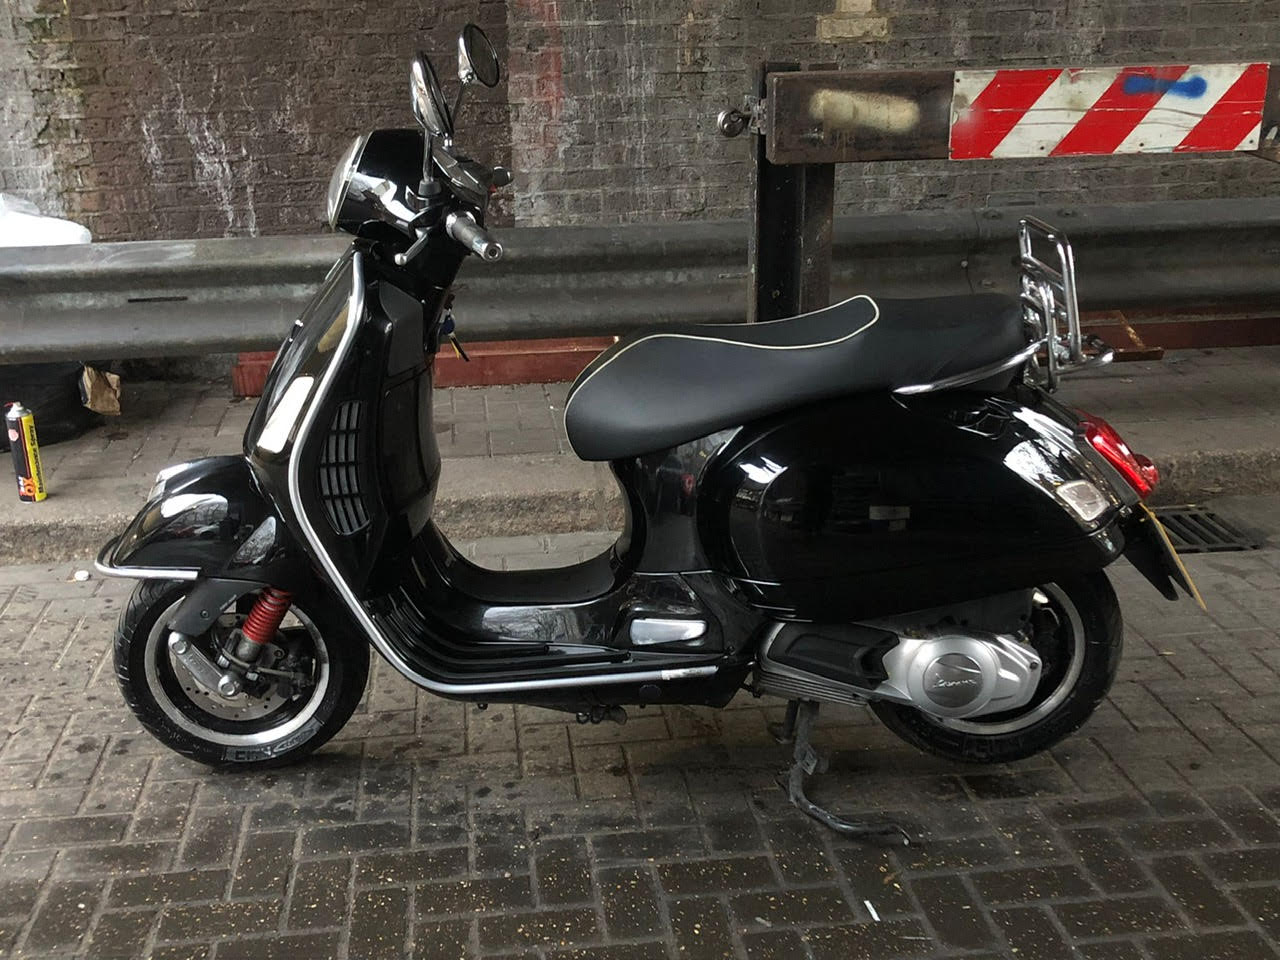 Piaggio Vespa GTS 125 Super Sport ABS Scooter 124cc 2016 SOLD - VIP  Motorcycles and Scooters